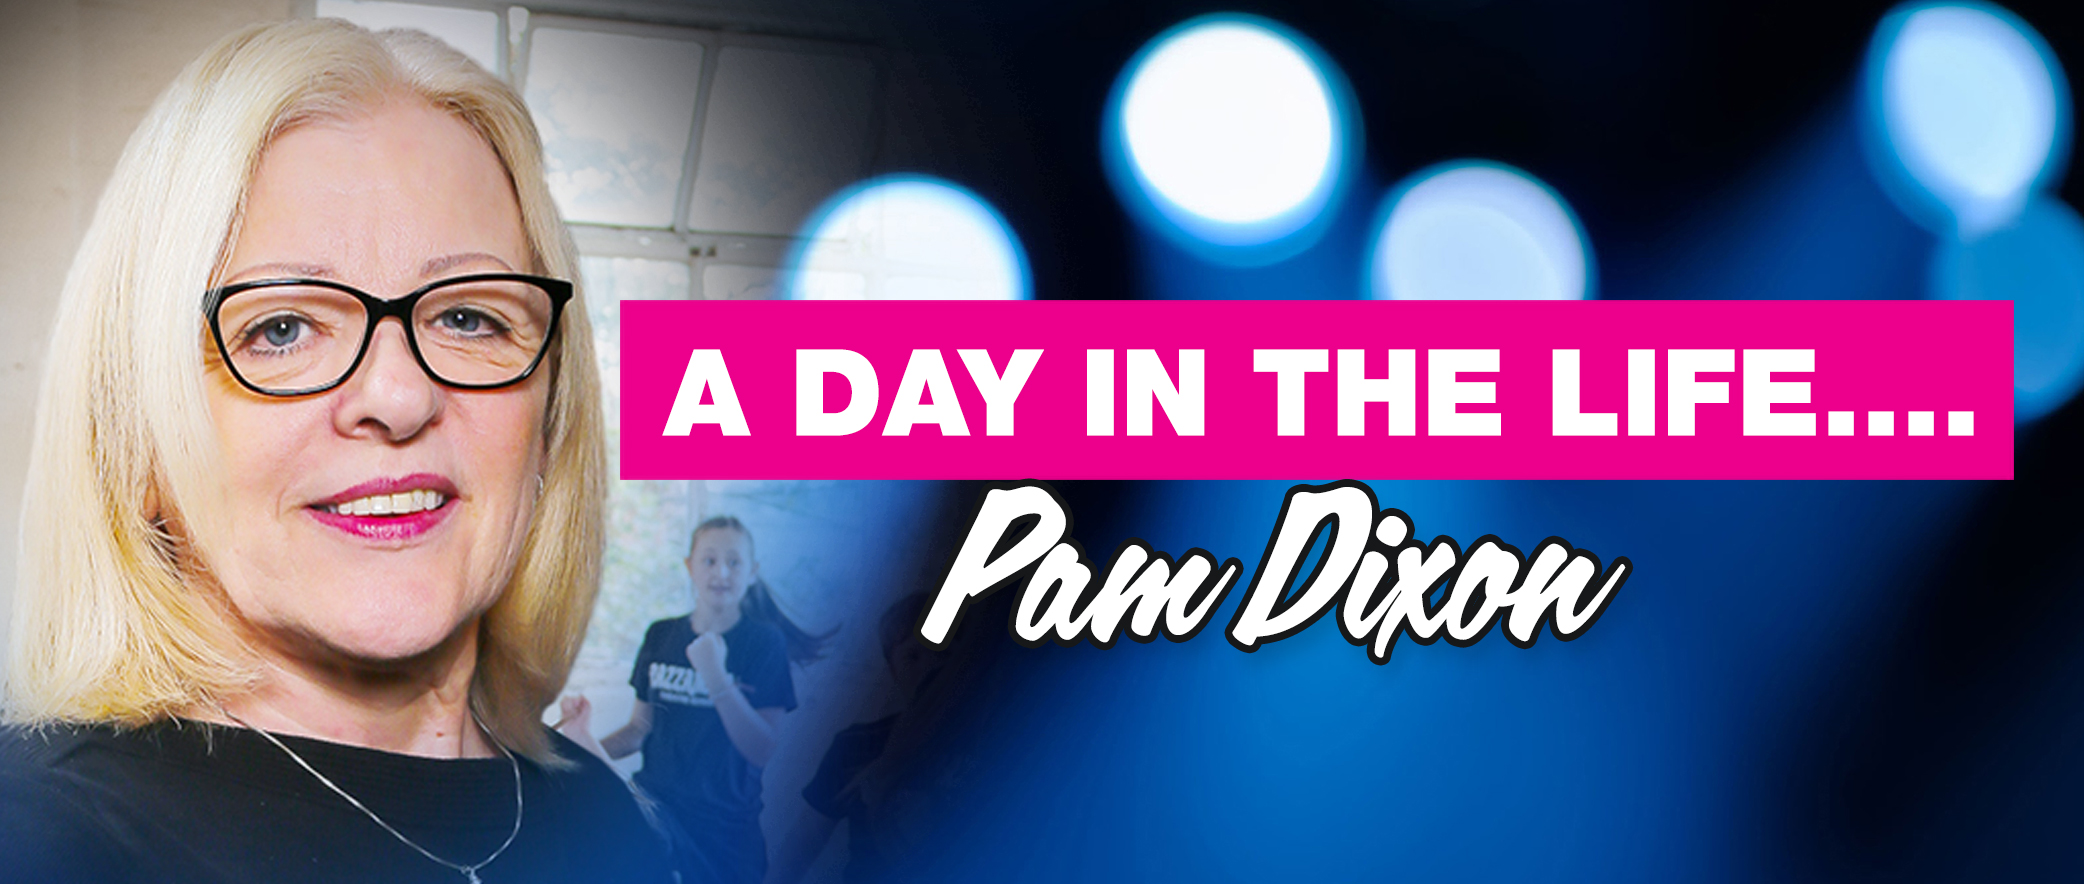 Day in the life, Pam Dixon